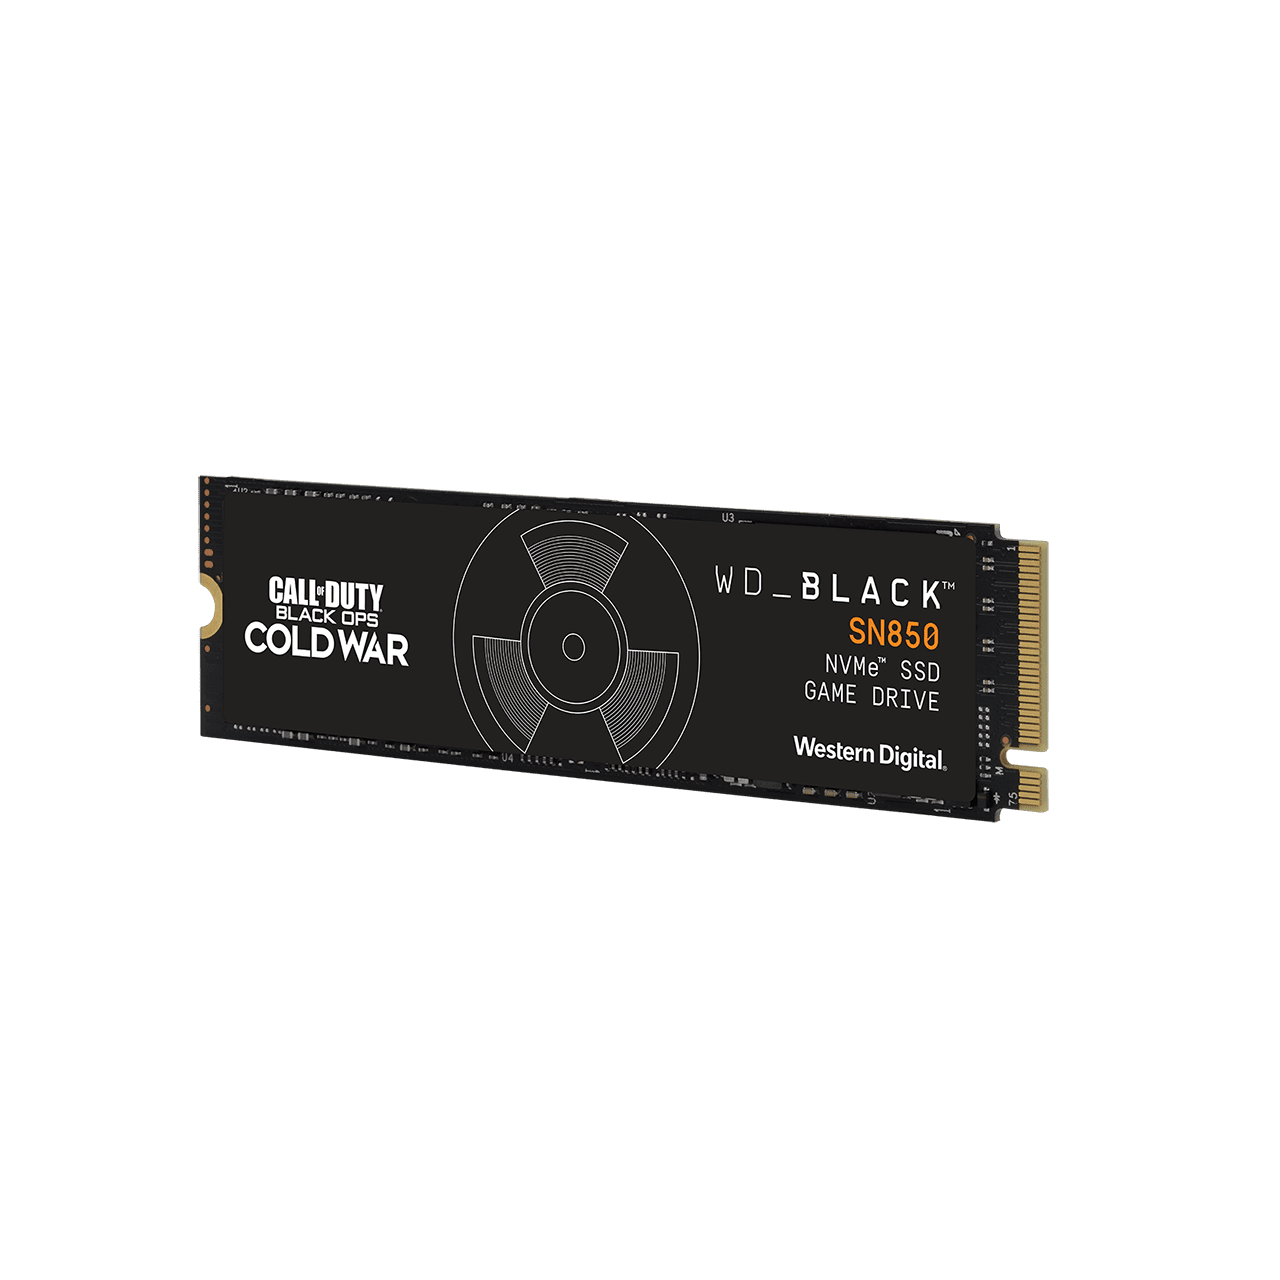 wd-black-sn850-call-of-duty-edition-nvme-ssd-angle.png.thumb.1280.1280.png